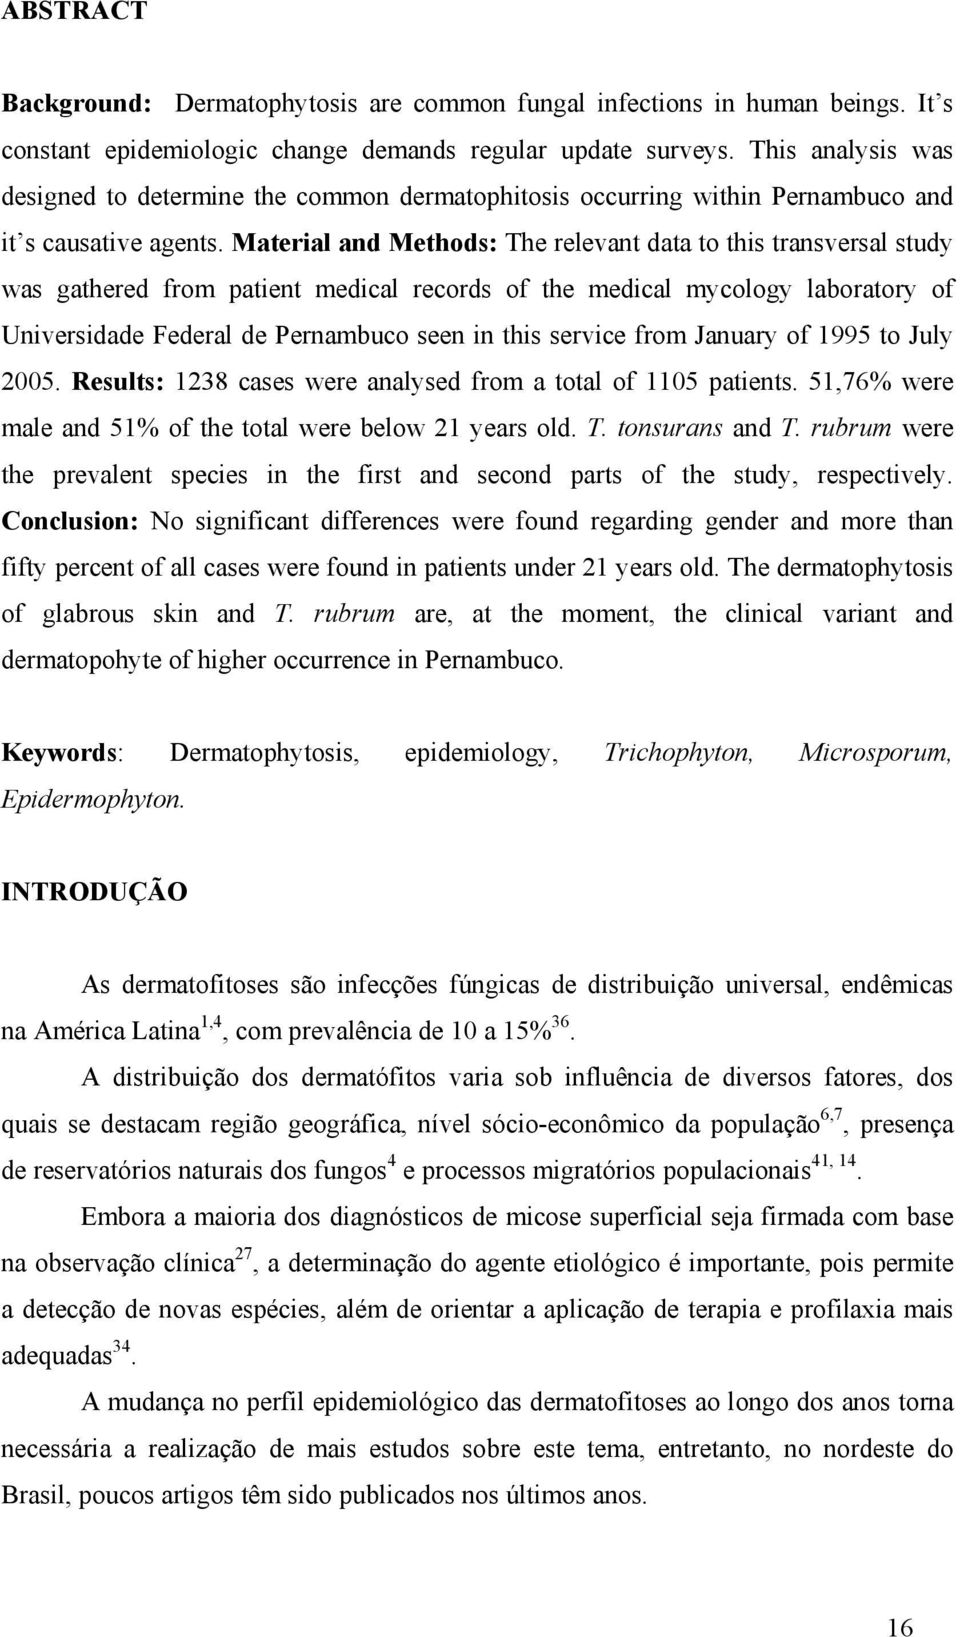 Material and Methods: The relevant data to this transversal study was gathered from patient medical records of the medical mycology laboratory of Universidade Federal de Pernambuco seen in this